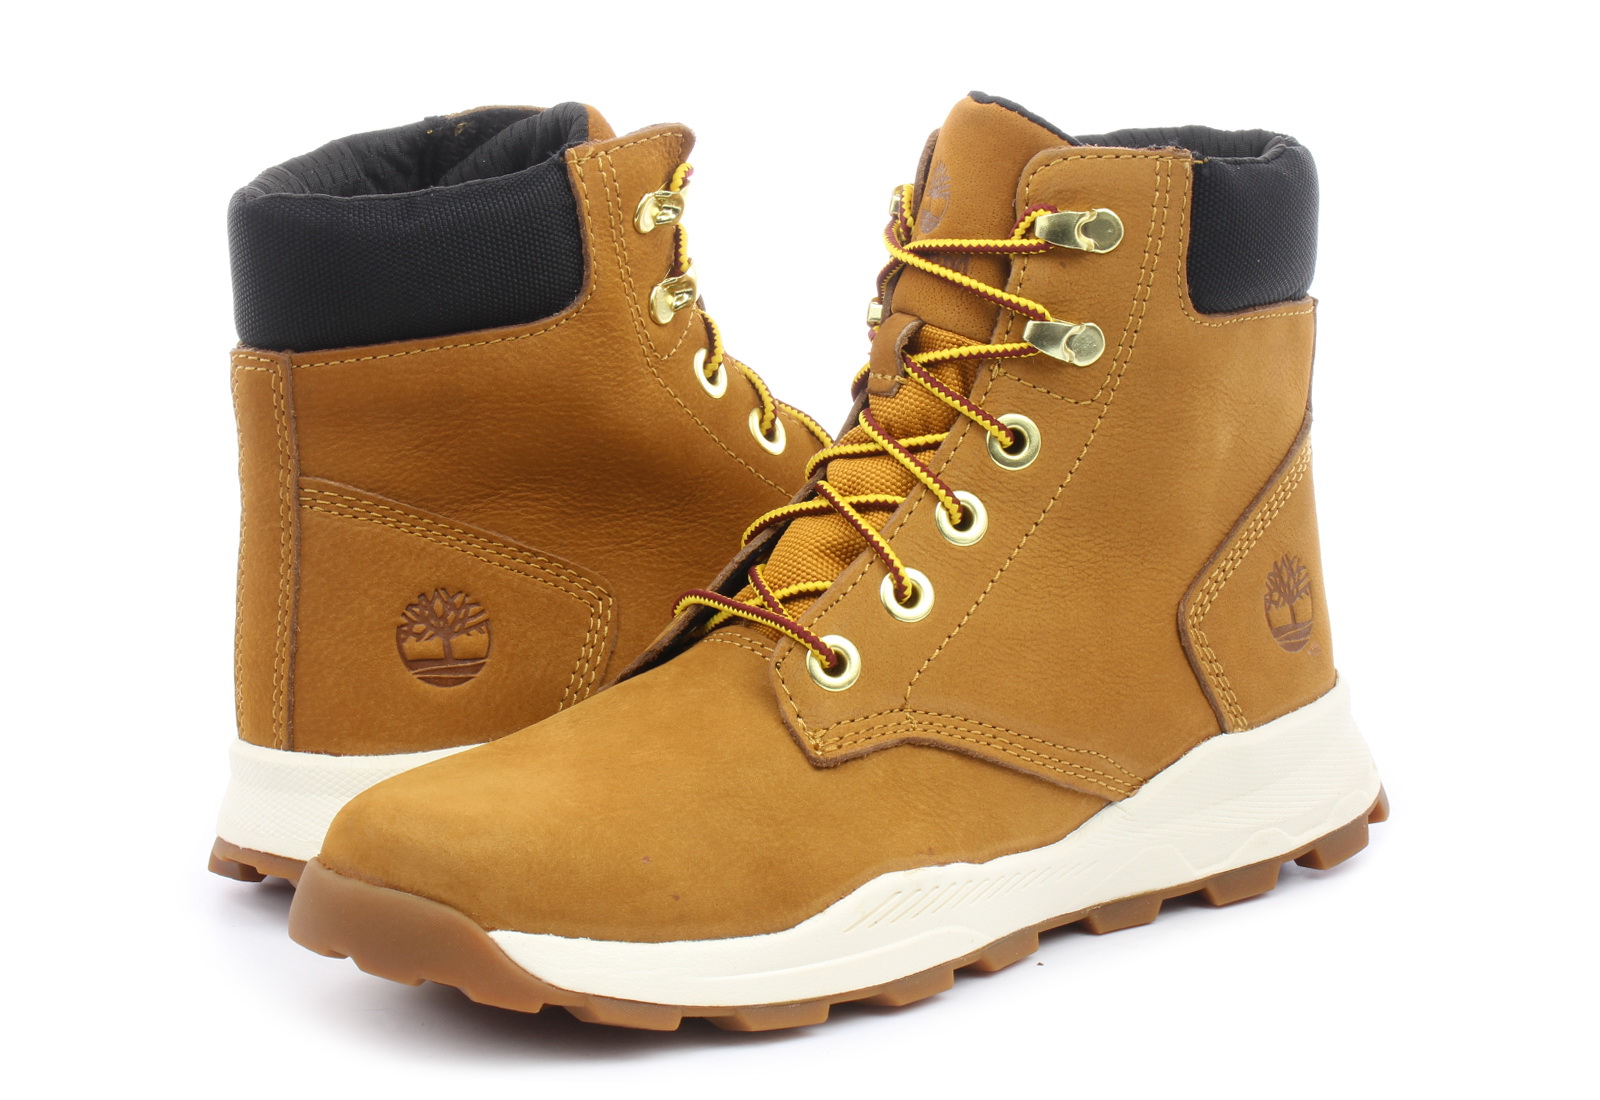 Menda City onderhoud kom Timberland Hikers - Brooklyn Sneaker Boot - A28FA-whe - Online shop for  sneakers, shoes and boots